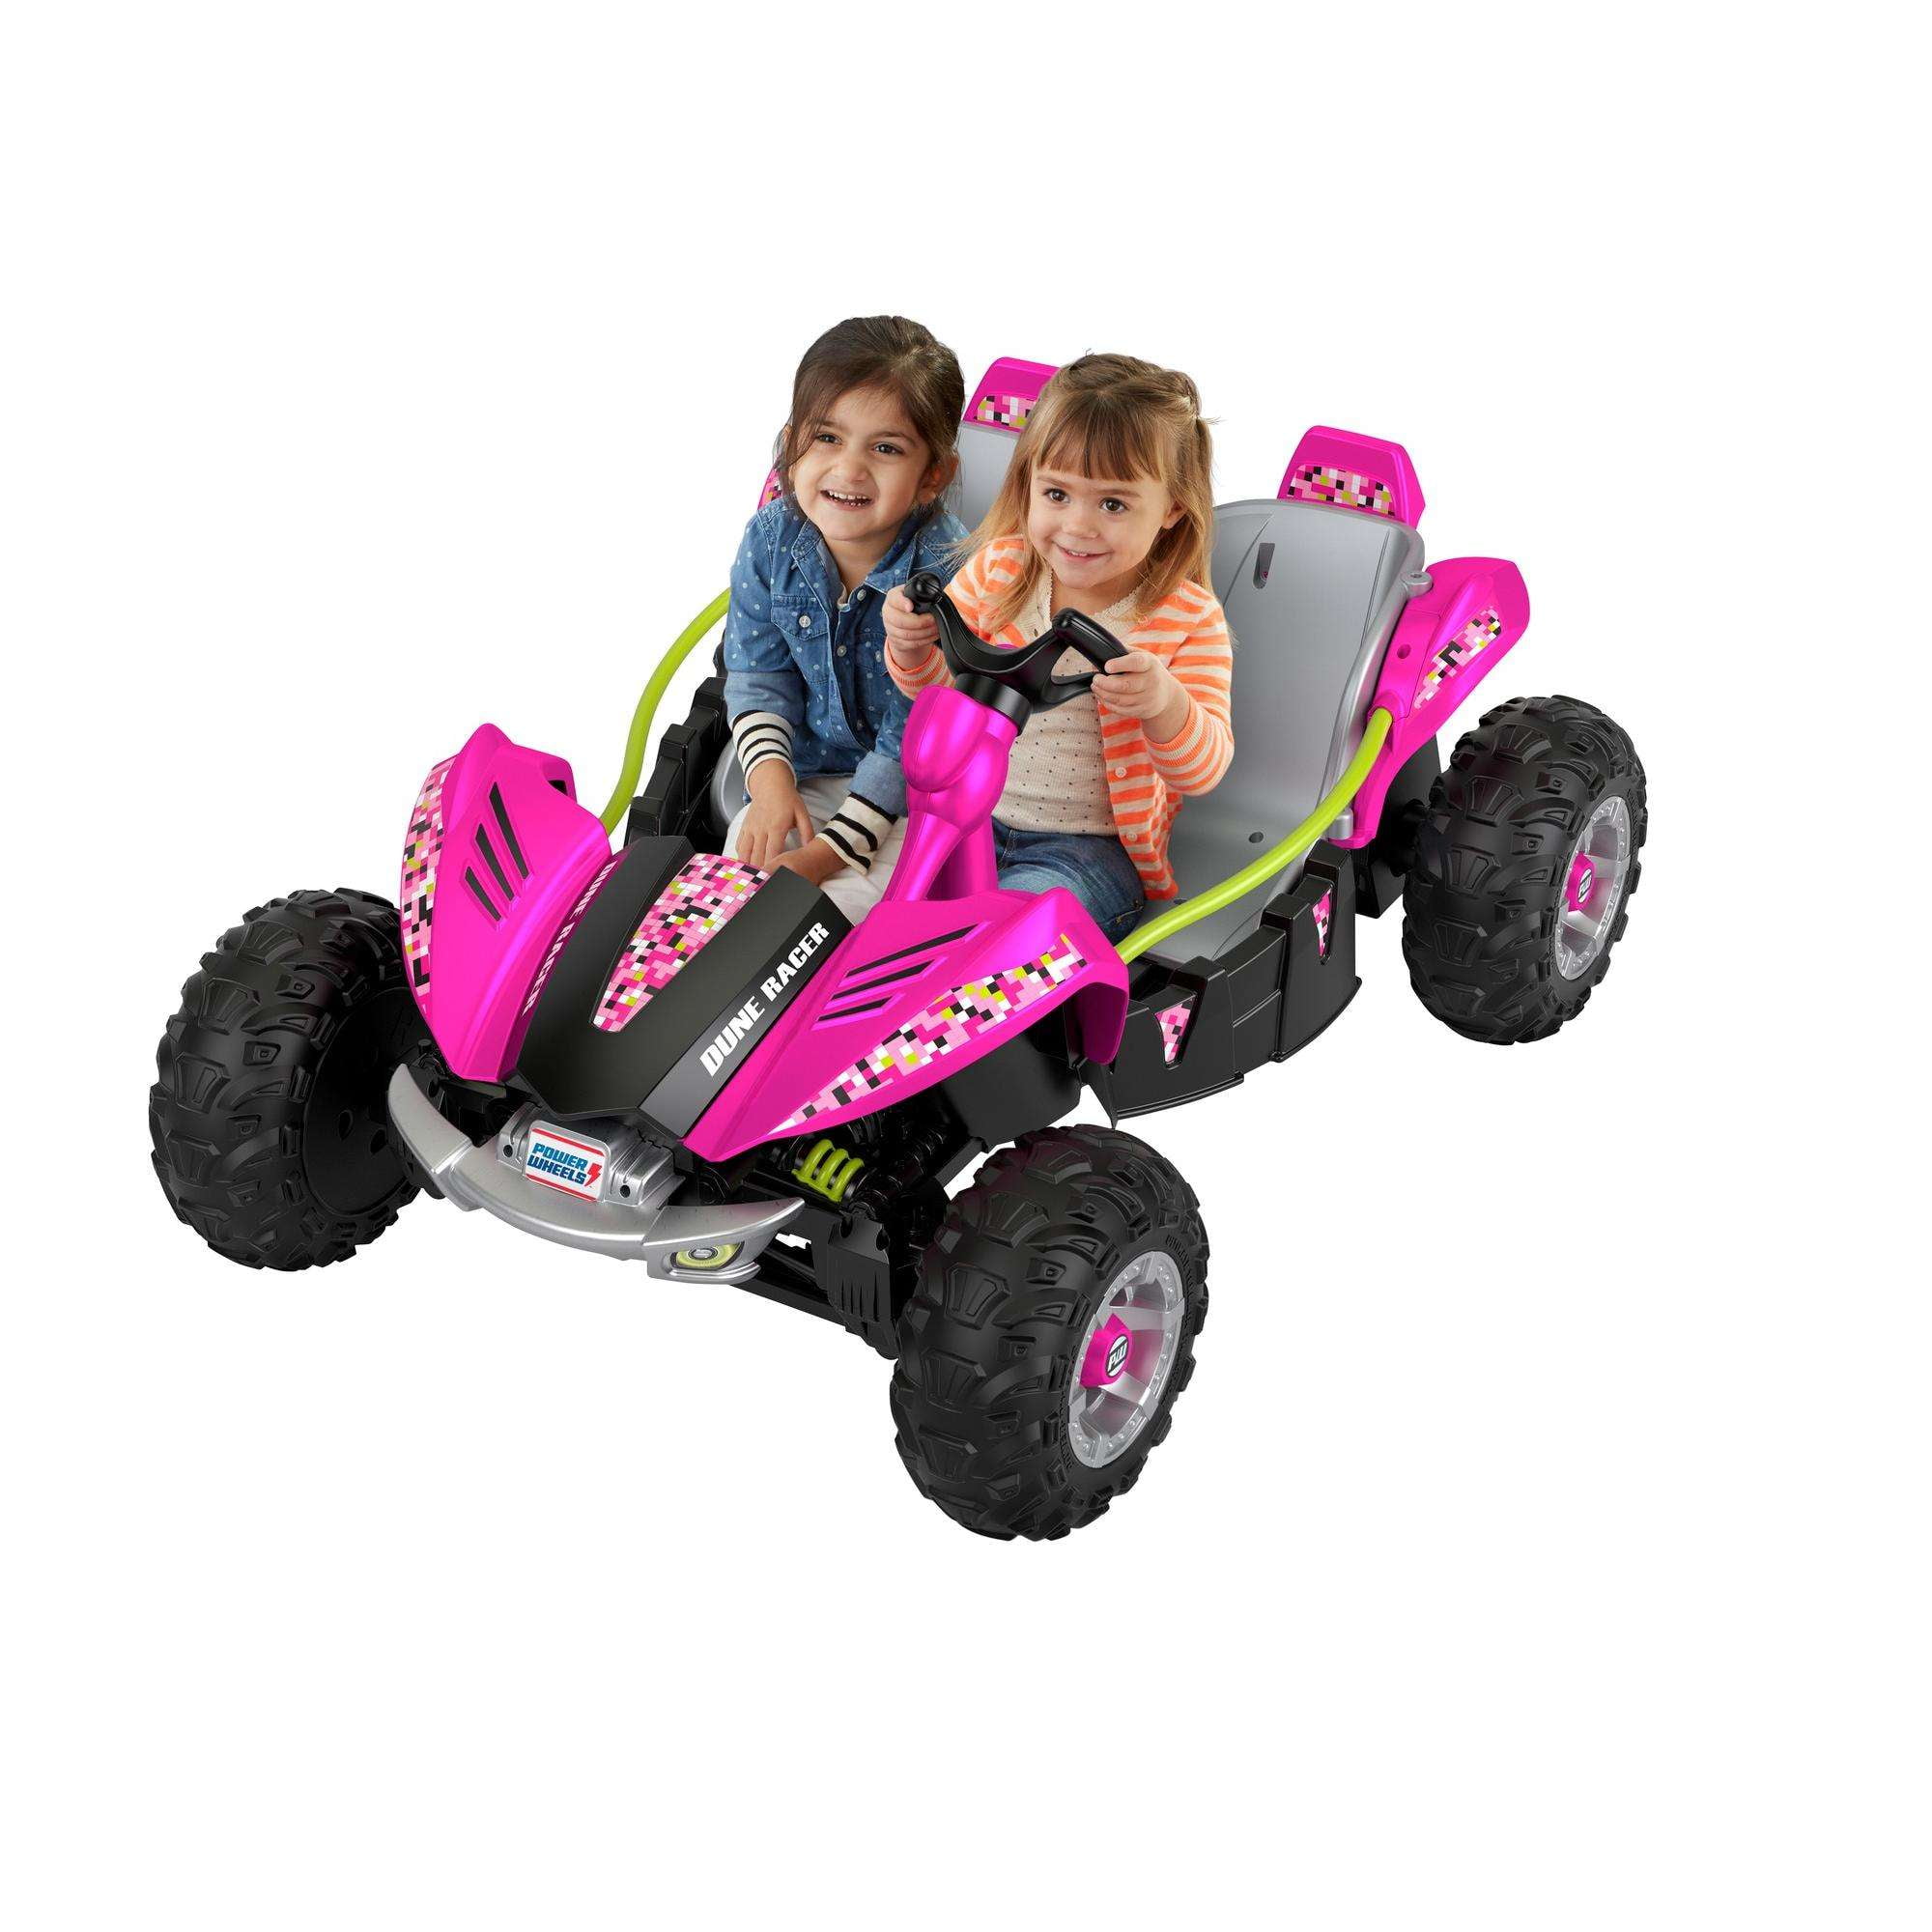 dune buggy ride on toy